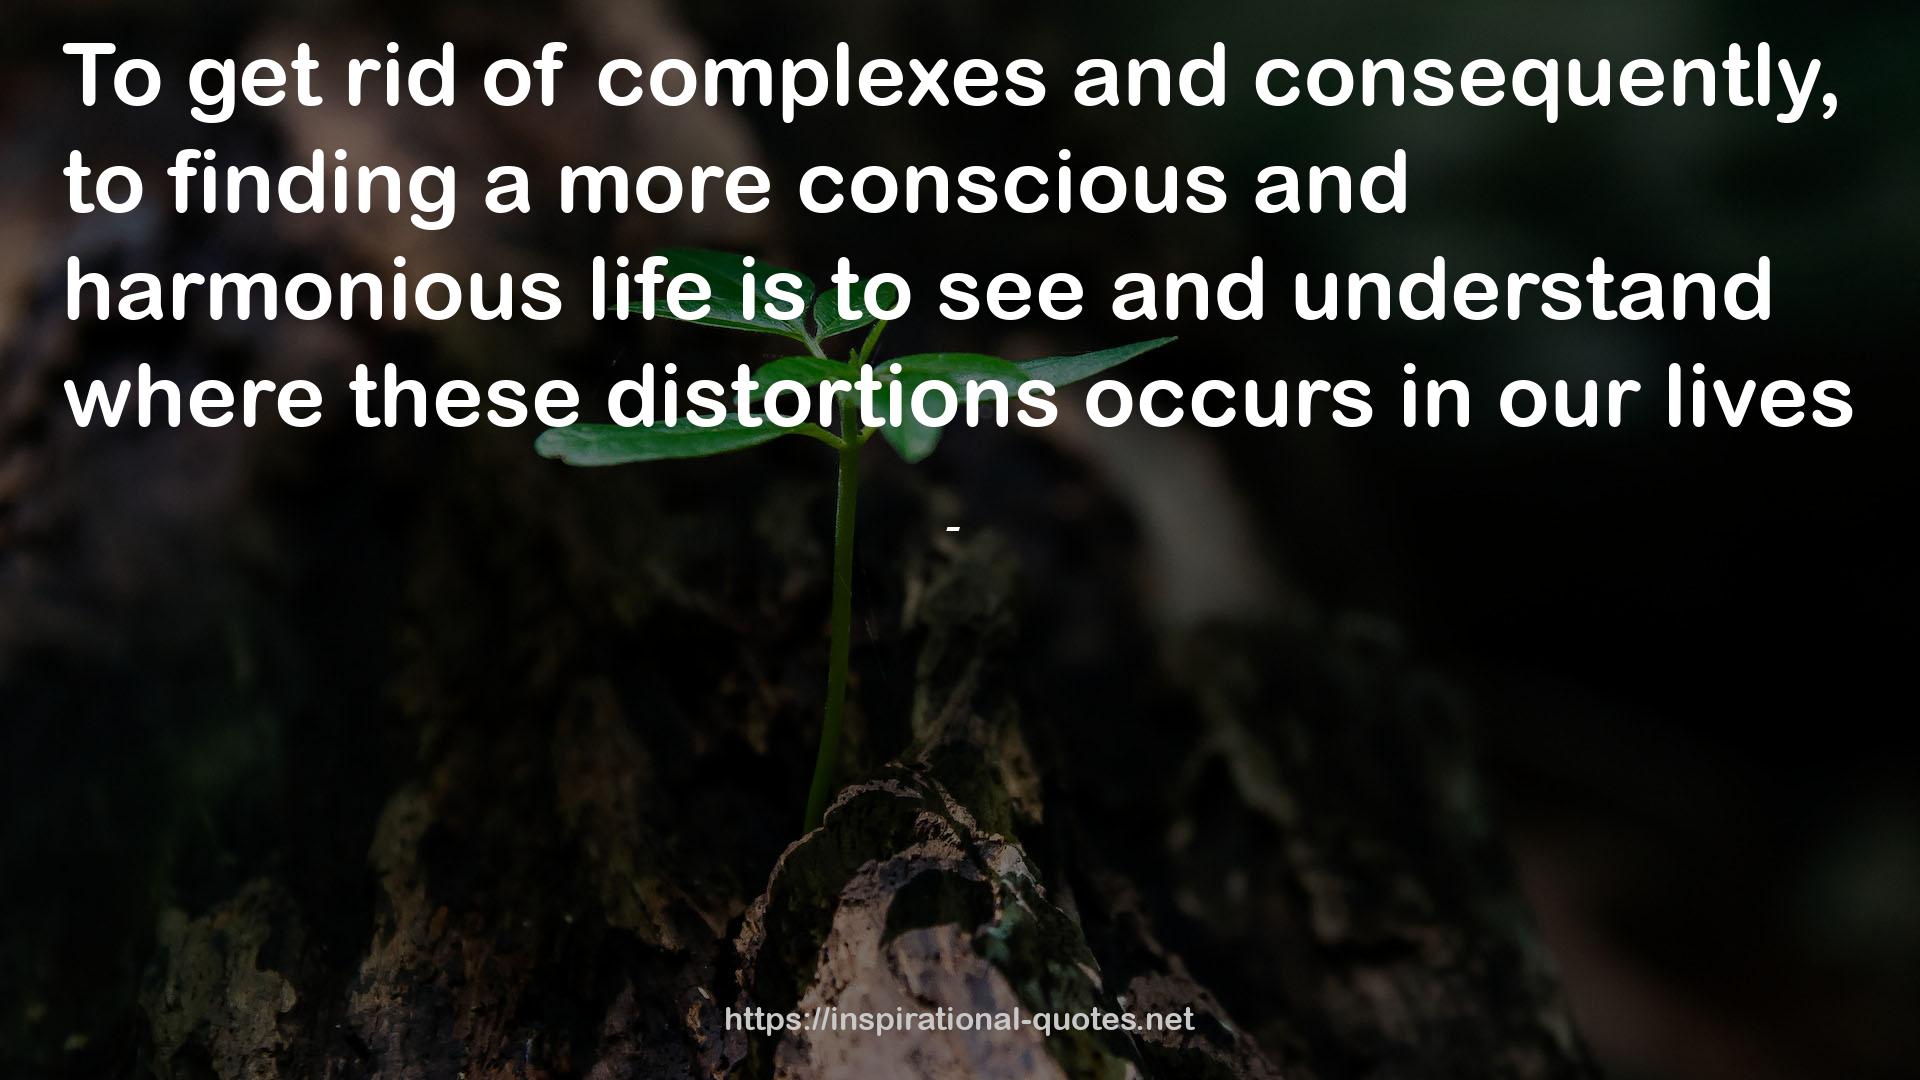 a more conscious and harmonious life  QUOTES